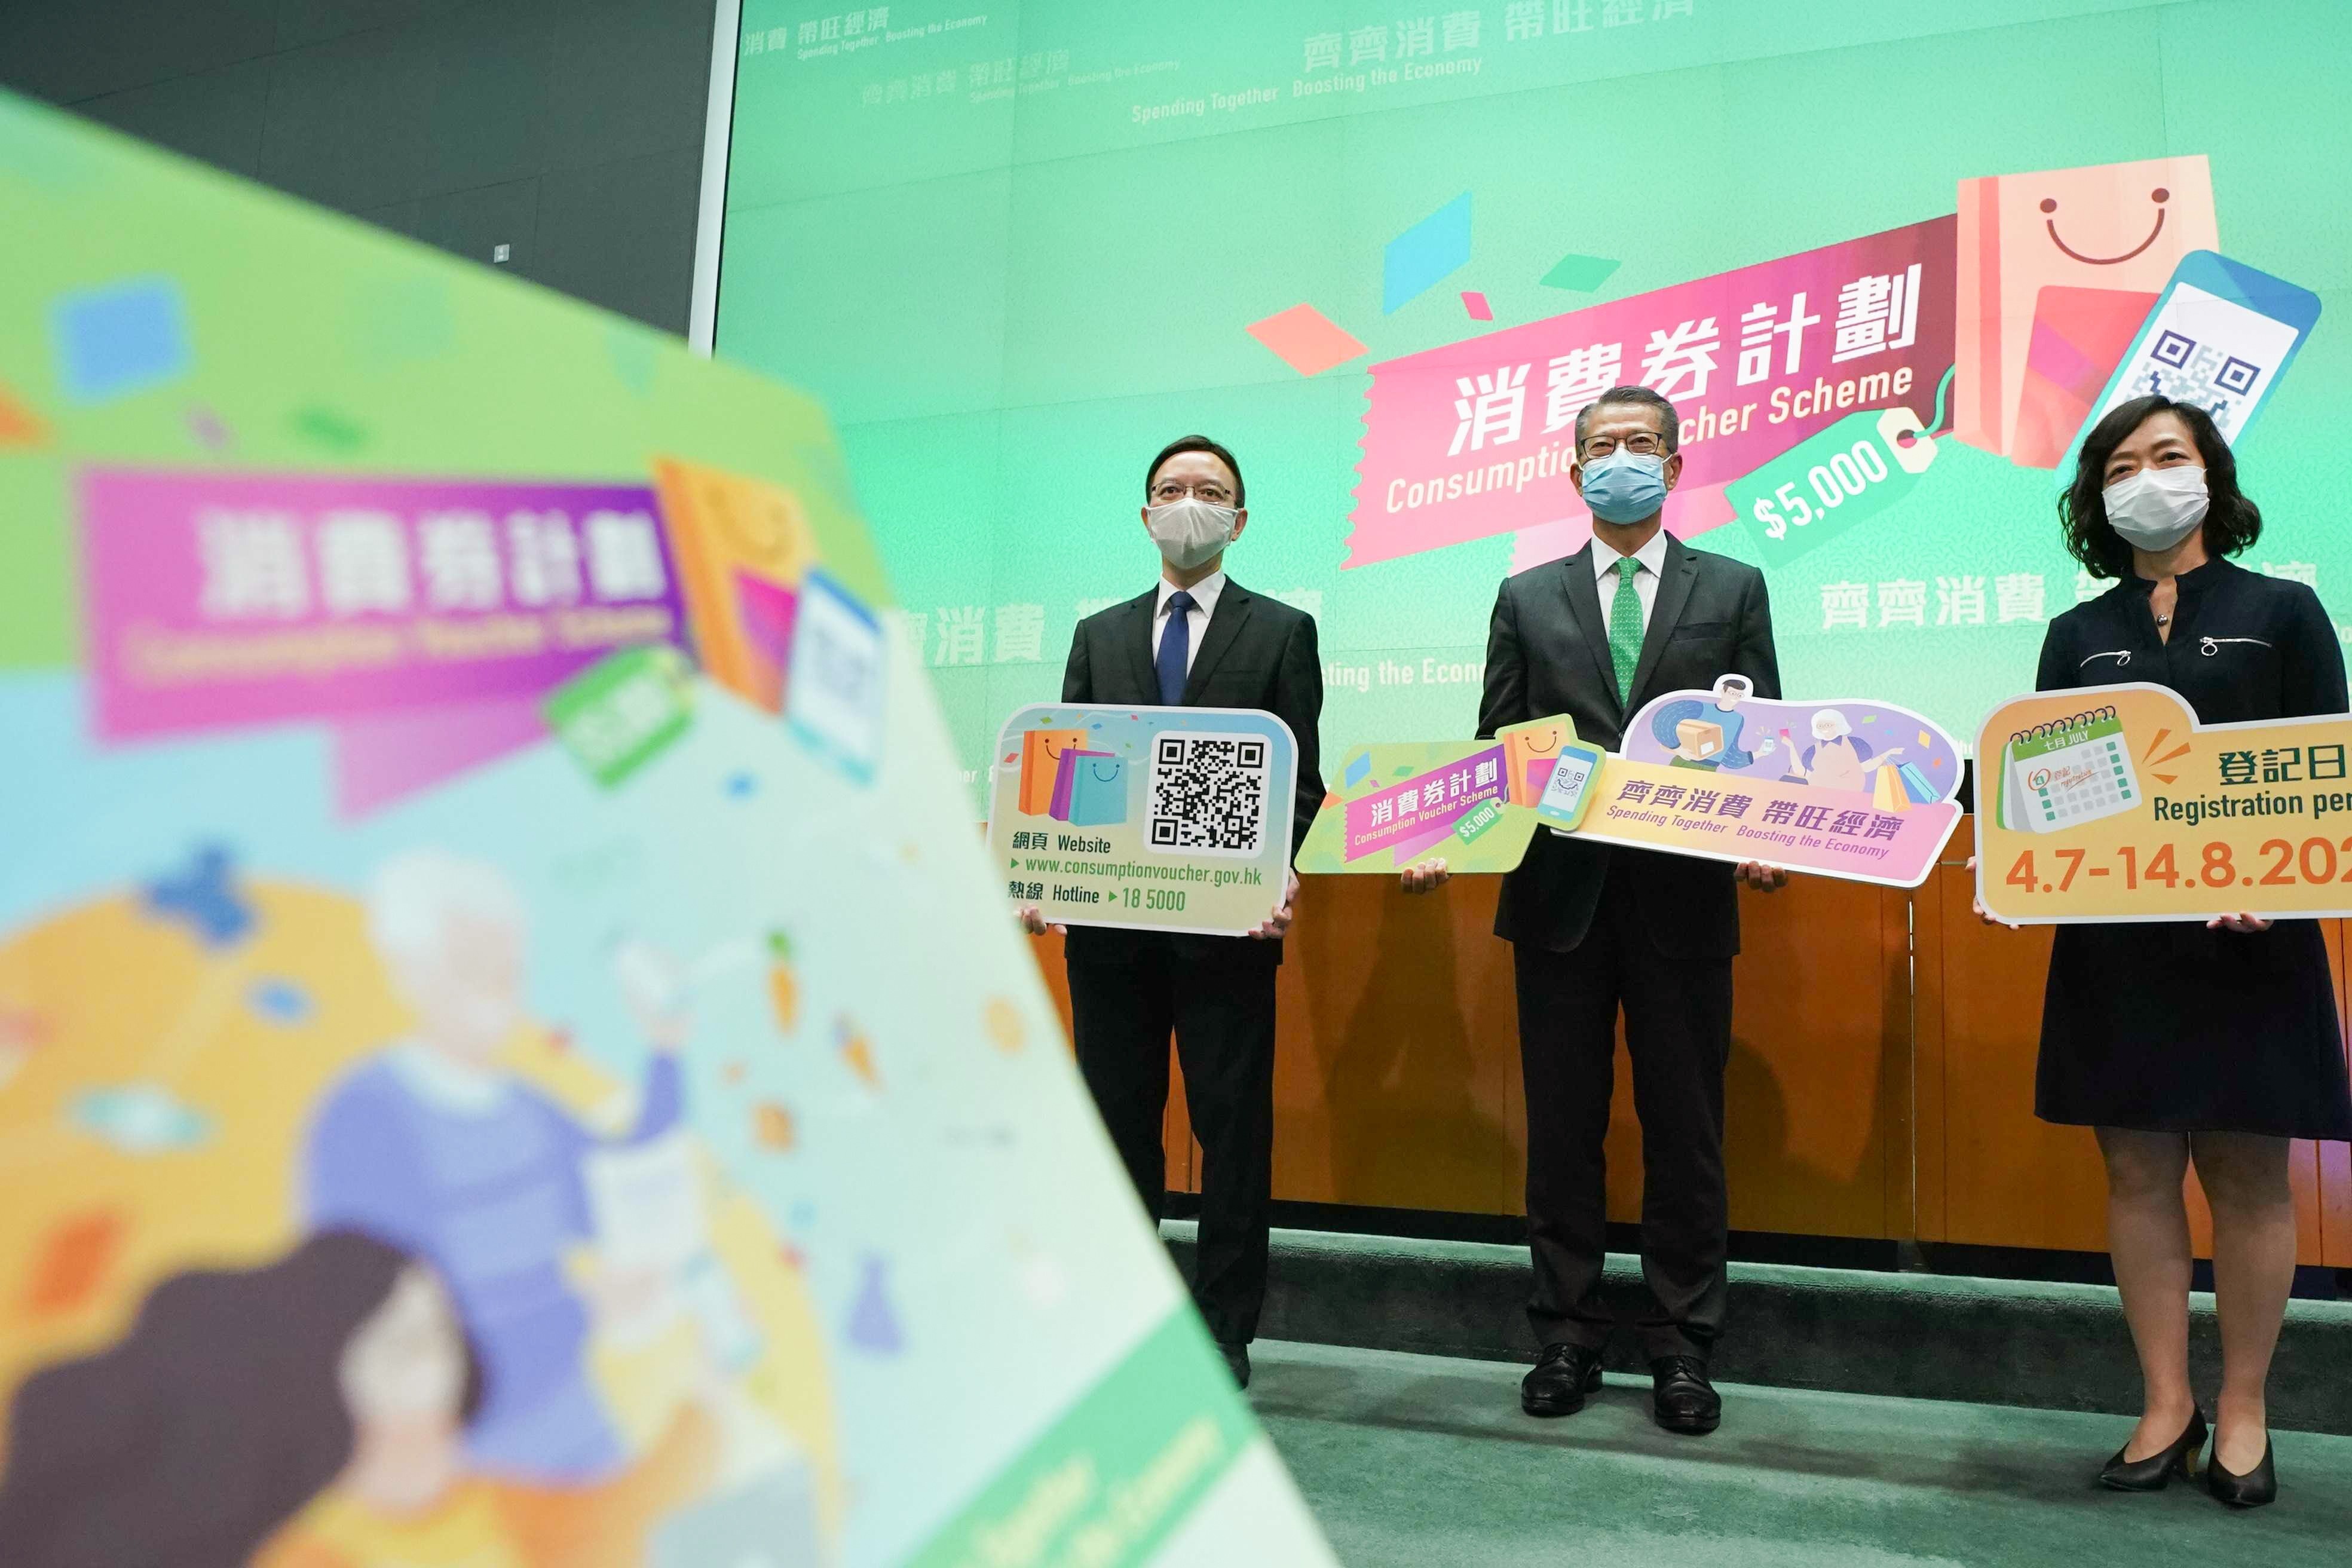 Hong Kong Financial Secretary, Paul Chan (midde), and other government officials held a press conference Friday to announce details of the city’s cash voucher scheme. (Photo: SCMP / Felix Wong)